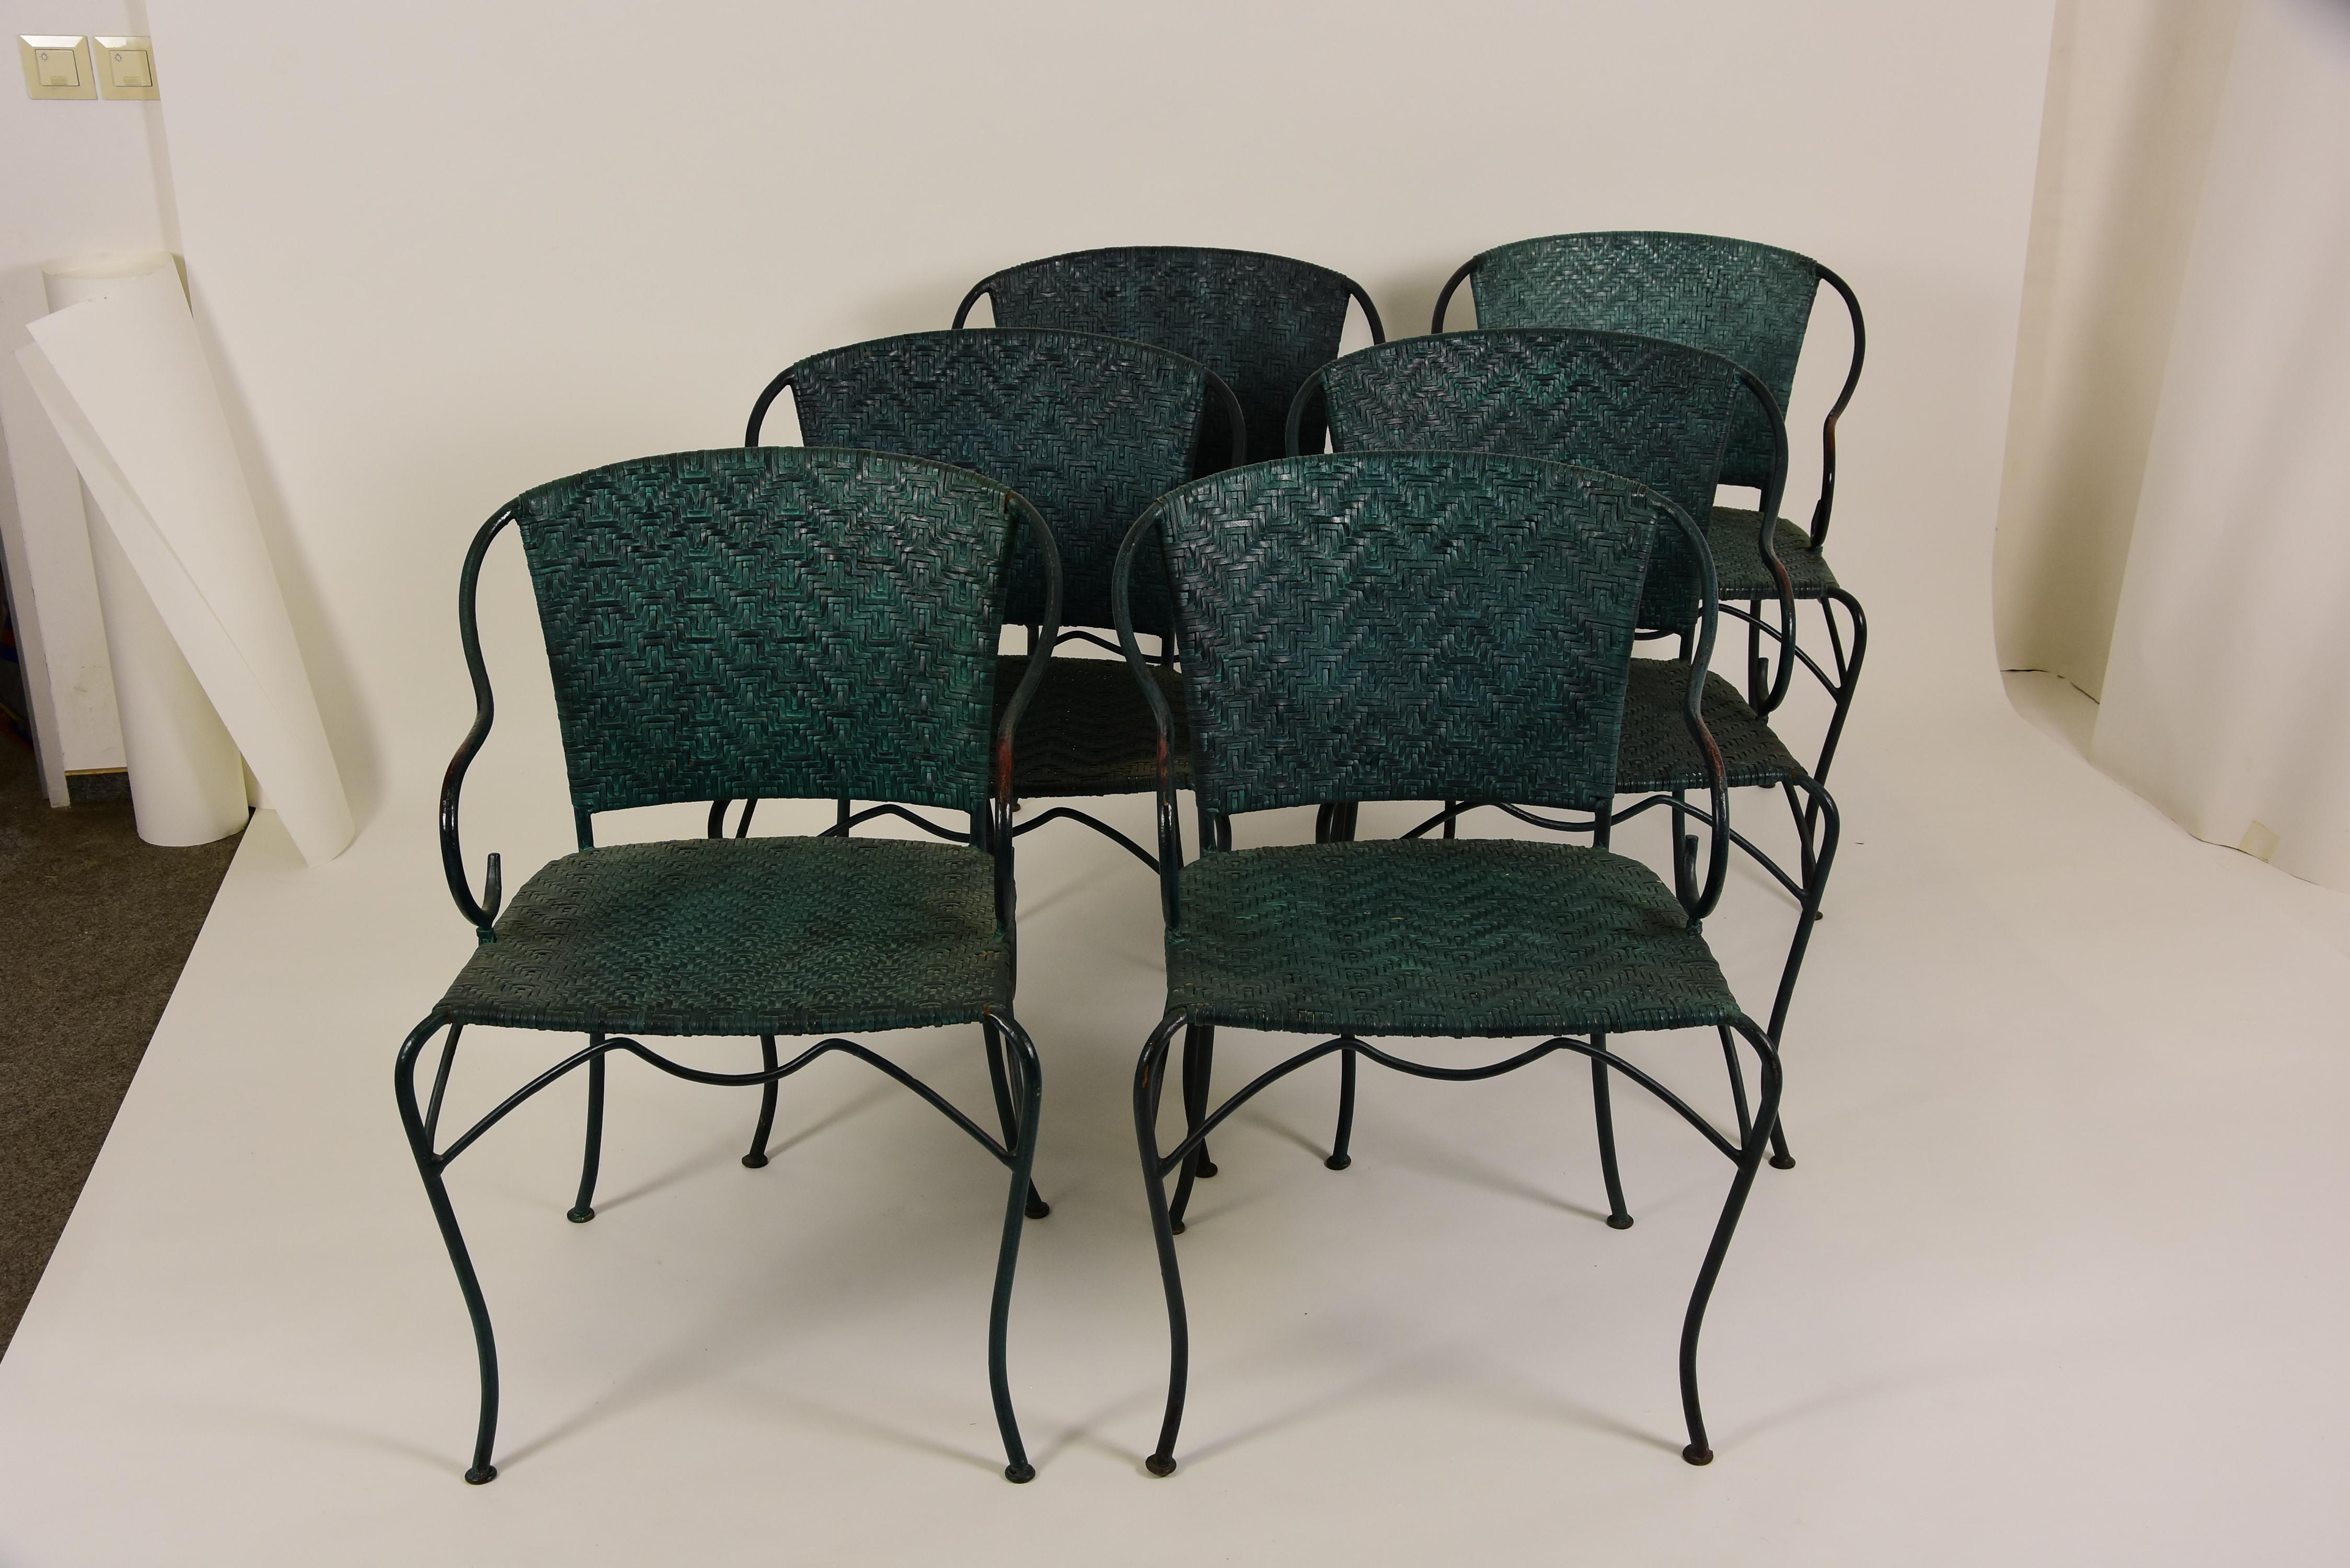 Rare set of six Anatol iron armchairs, with green buffalo leather braided seat and backrest. The iron frame has been wiped green in vintage style. The buffalo leather has the same green tone as the iron frame. This armchair is made of solid iron